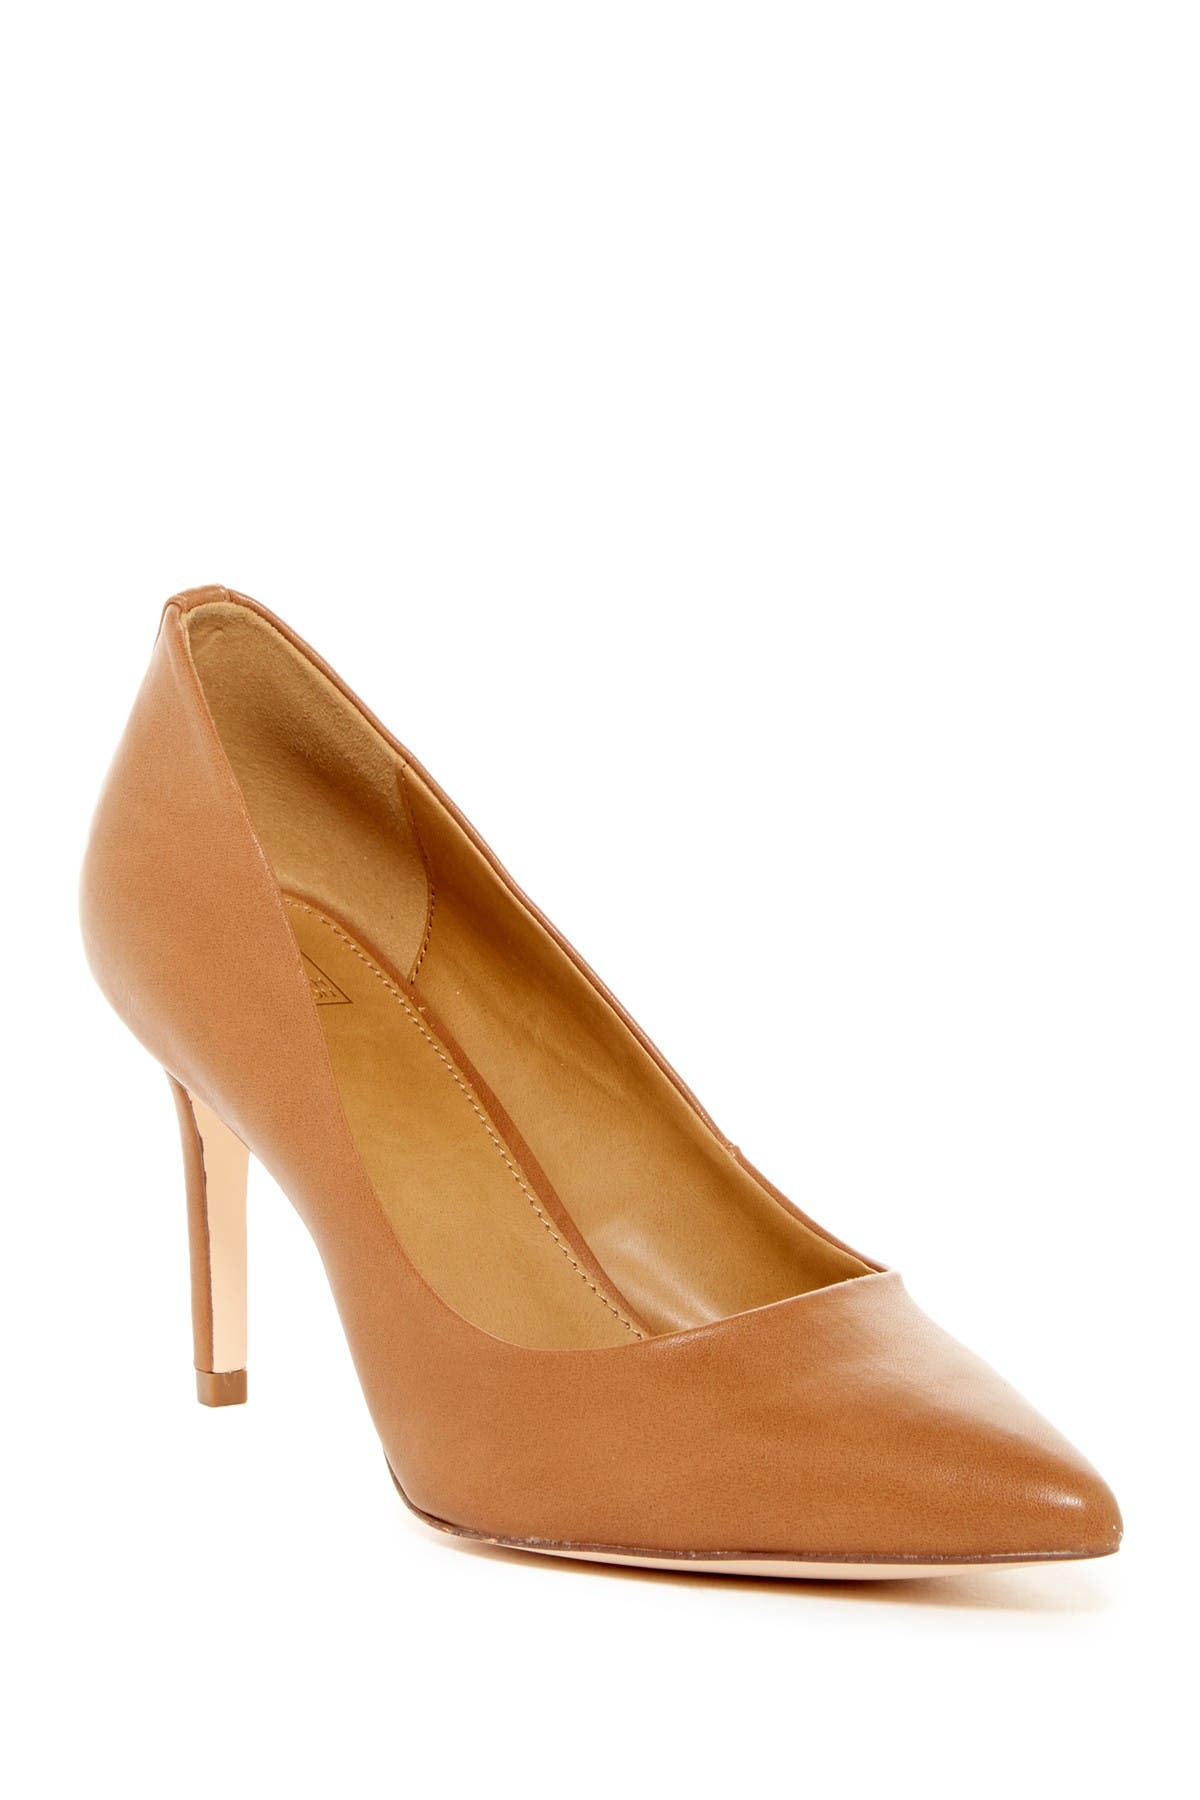 wide width pointed toe pumps